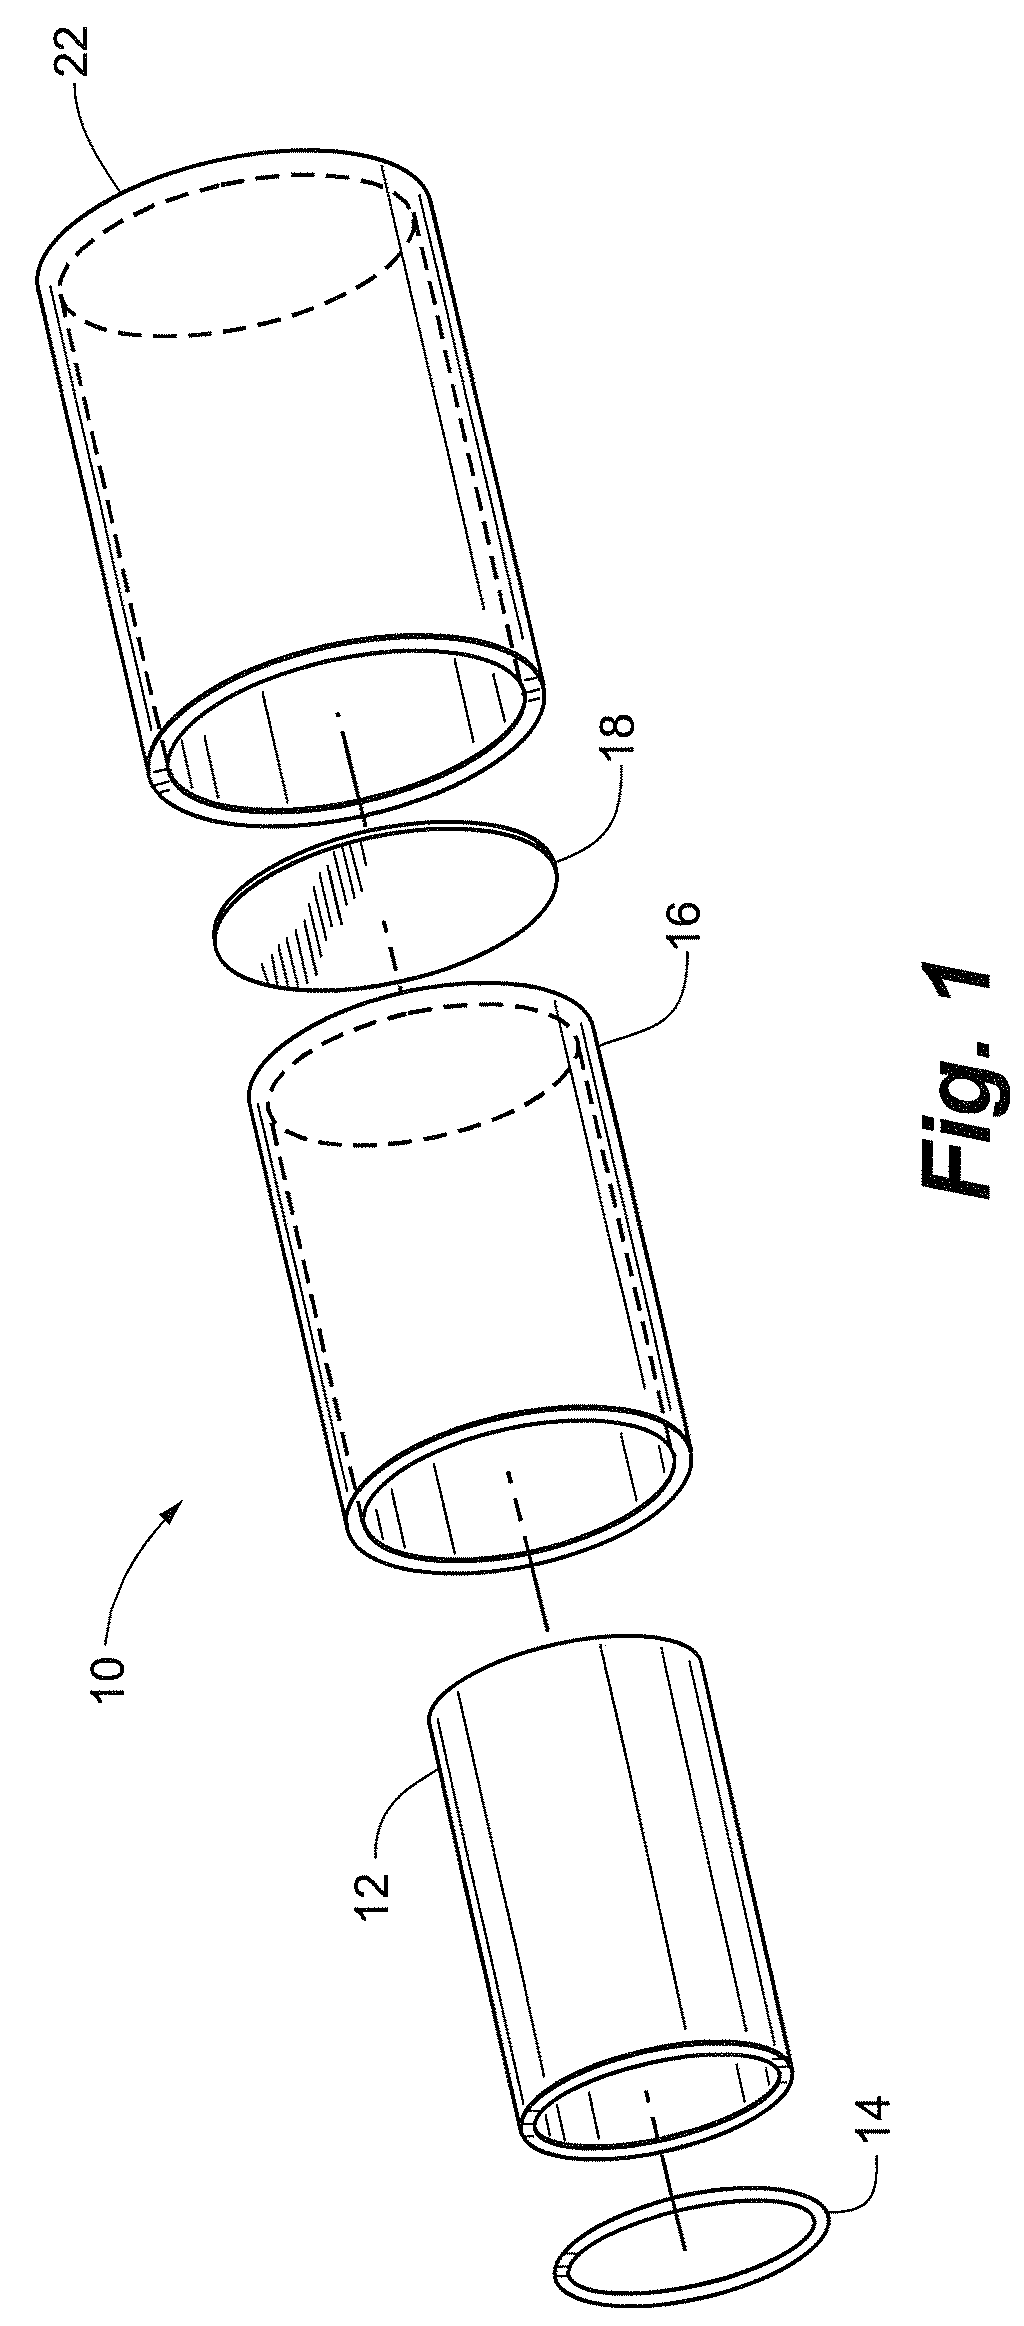 Cavity resonator for magnetic resonance systems